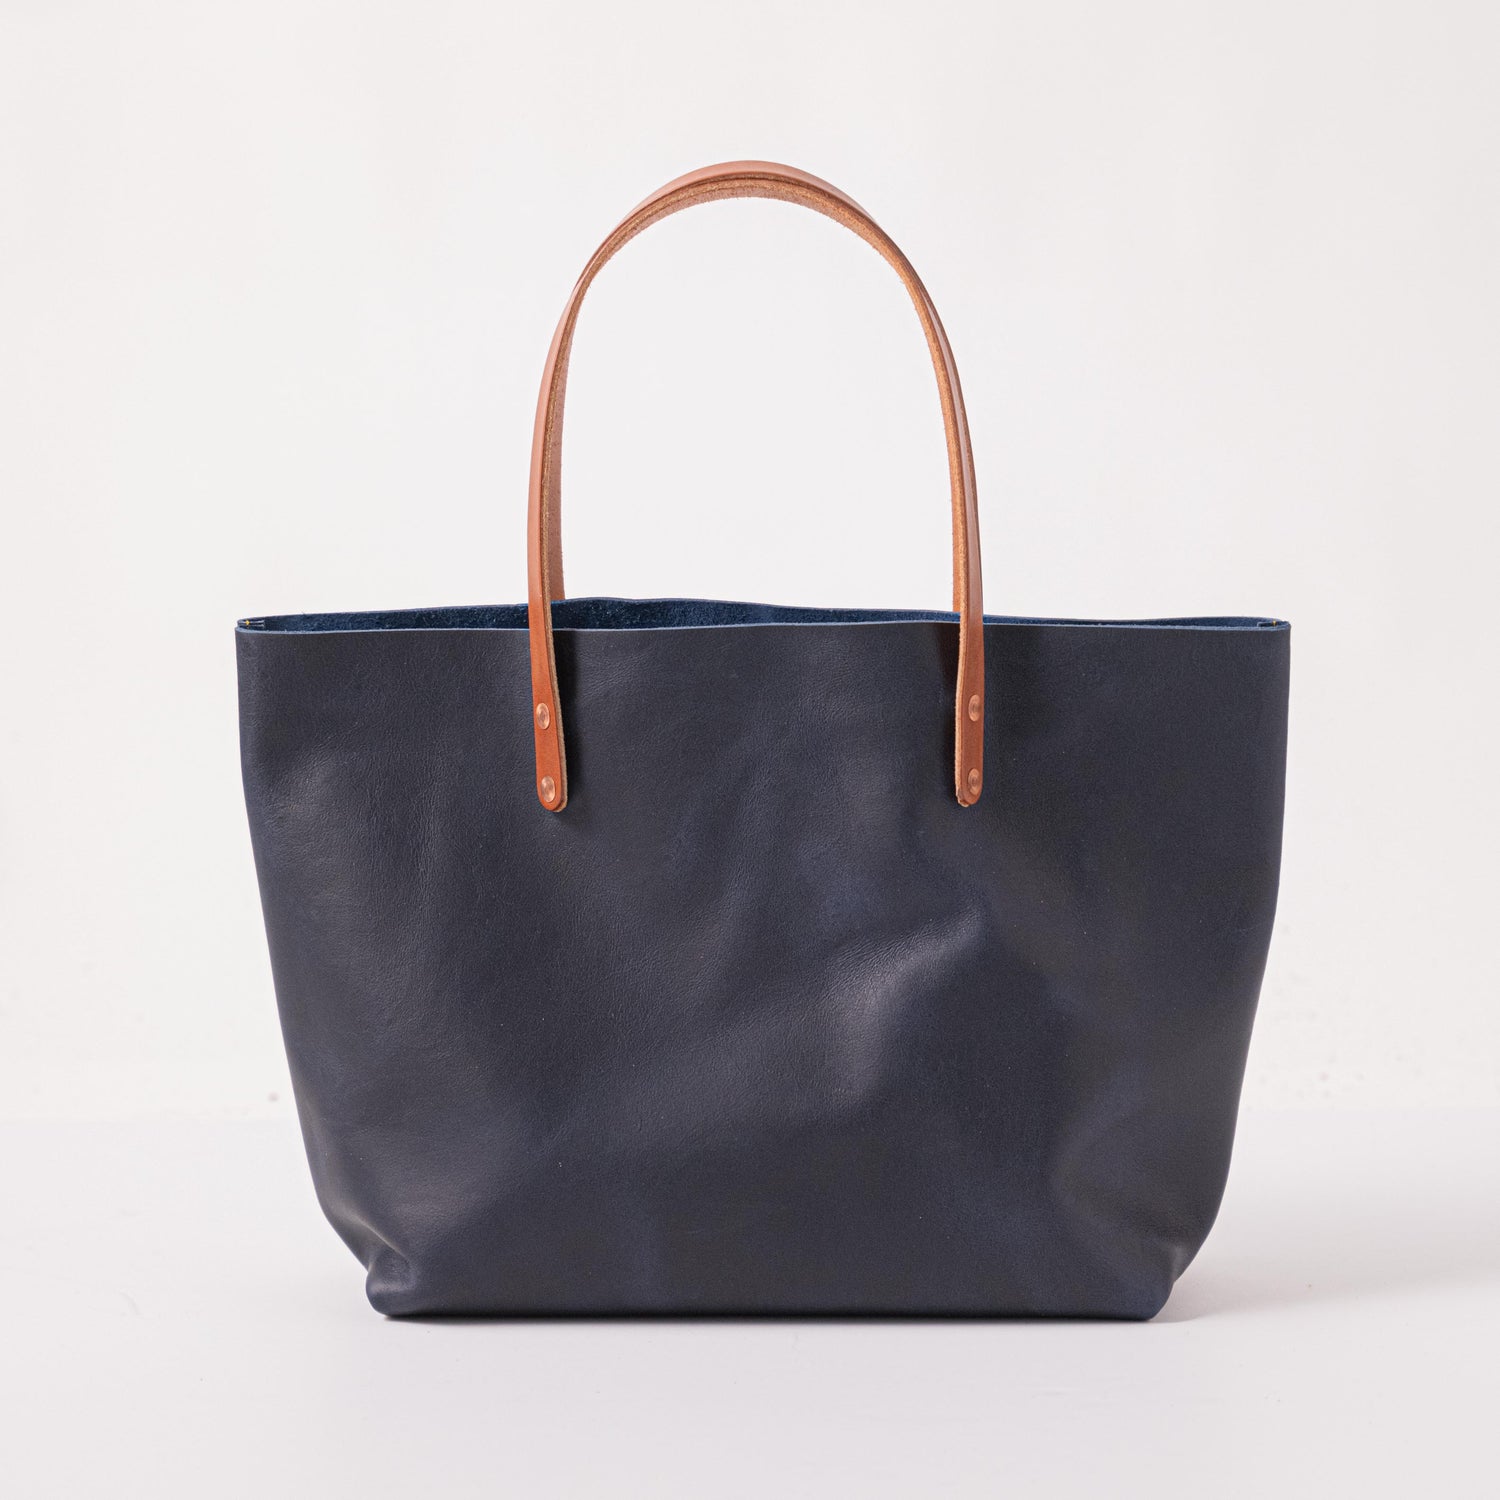 Leather Tote Bags: East West Tote | Leather Handbags by KMM & Co. Standard / Snap Closure (FINAL Sale) +$10